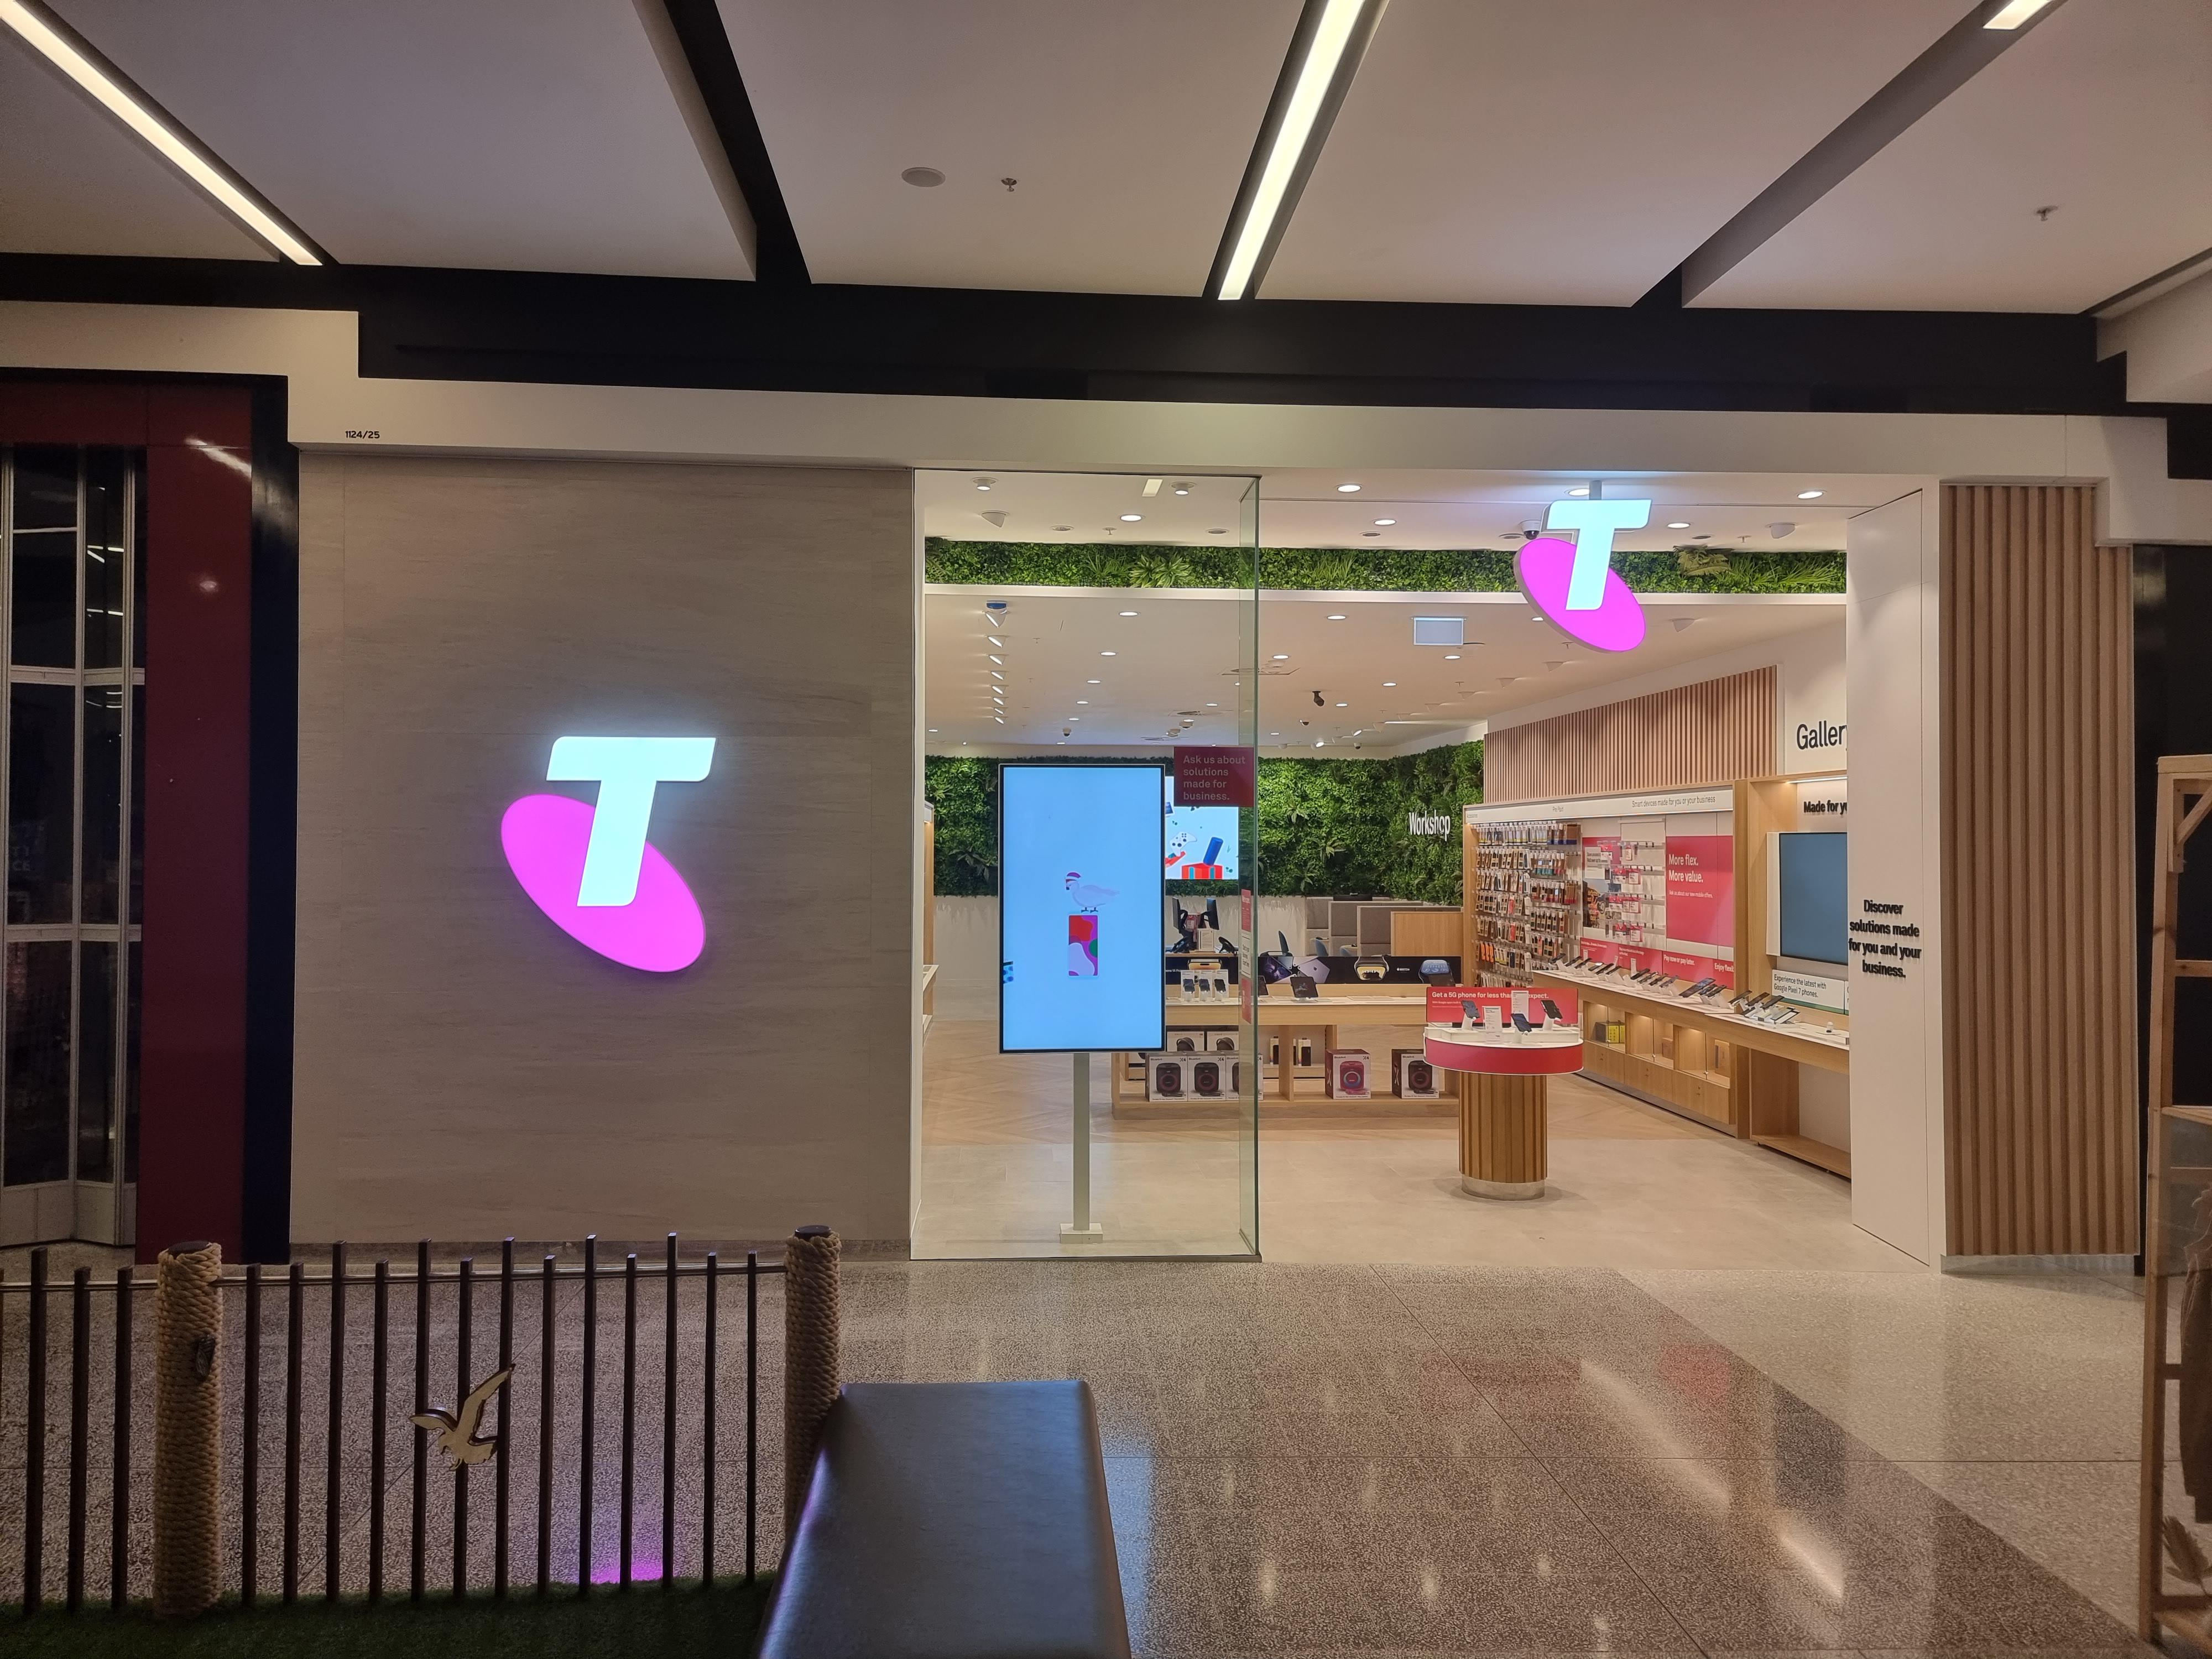 Images Telstra Shellharbour